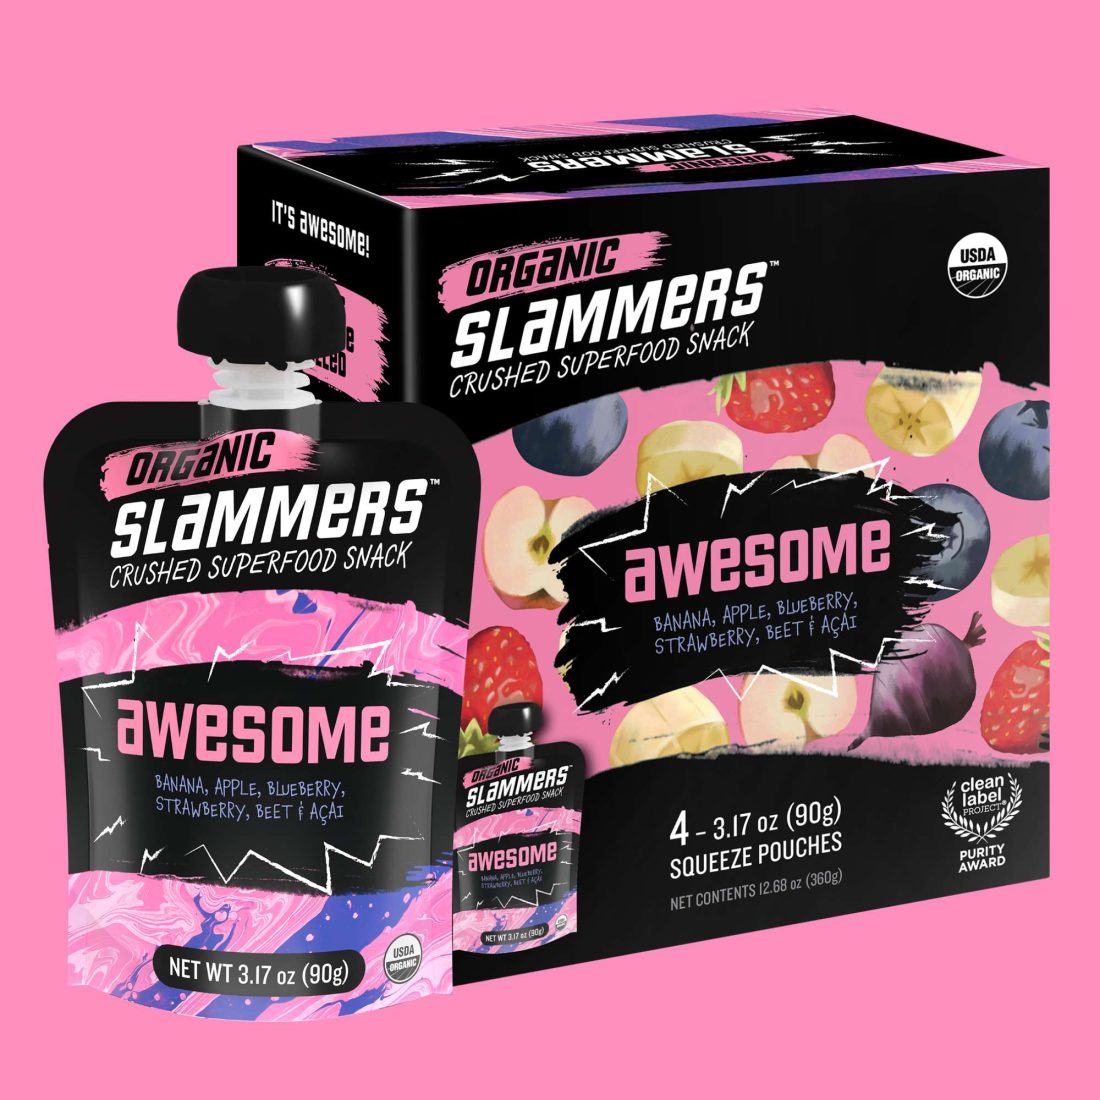 Slammers Awesome pouch and box_pink background